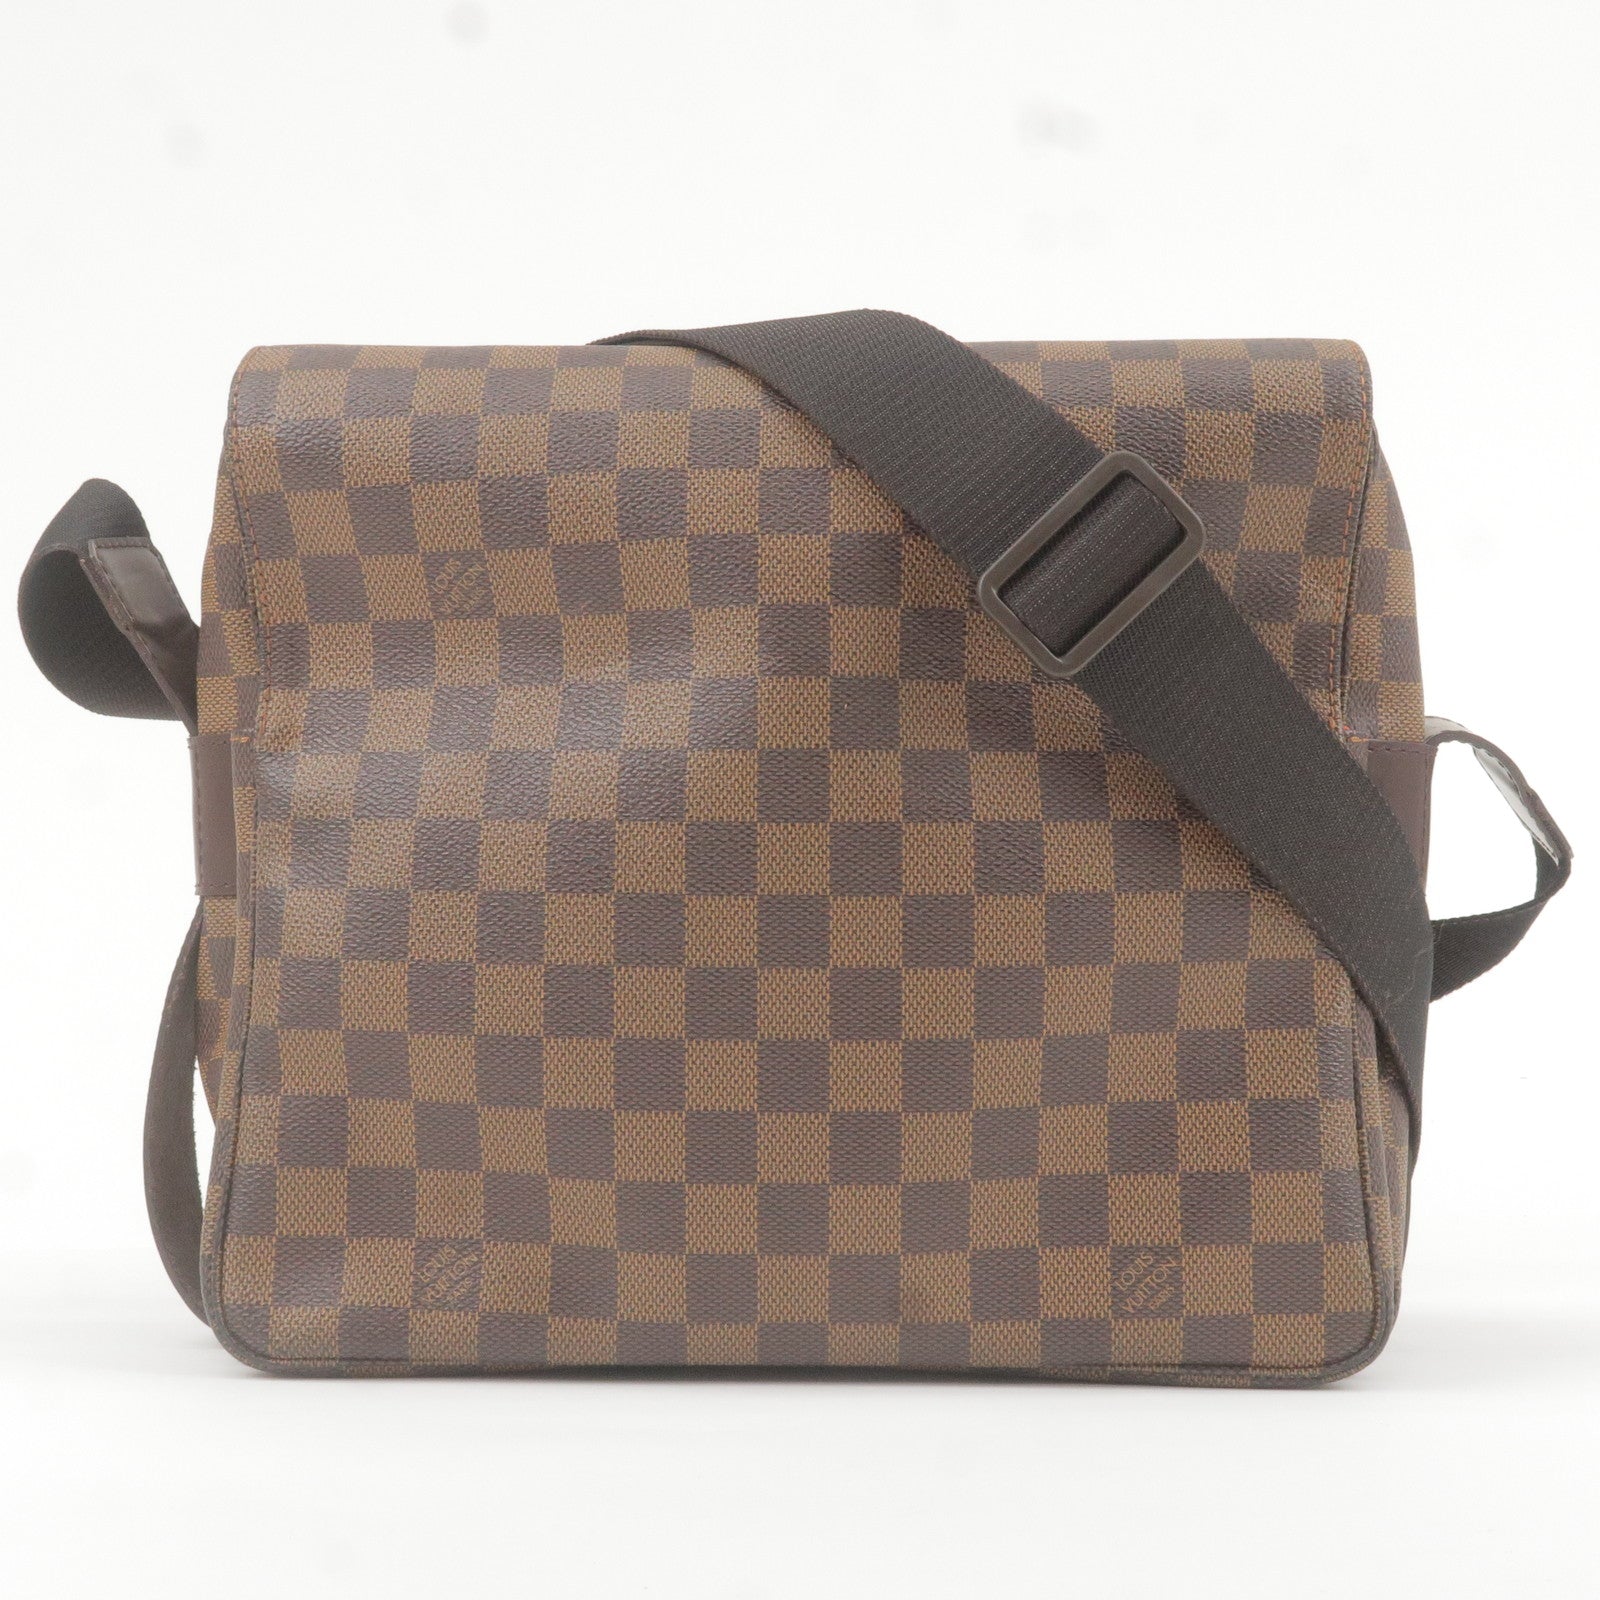 Naviglio leather crossbody bag Louis Vuitton Brown in Leather